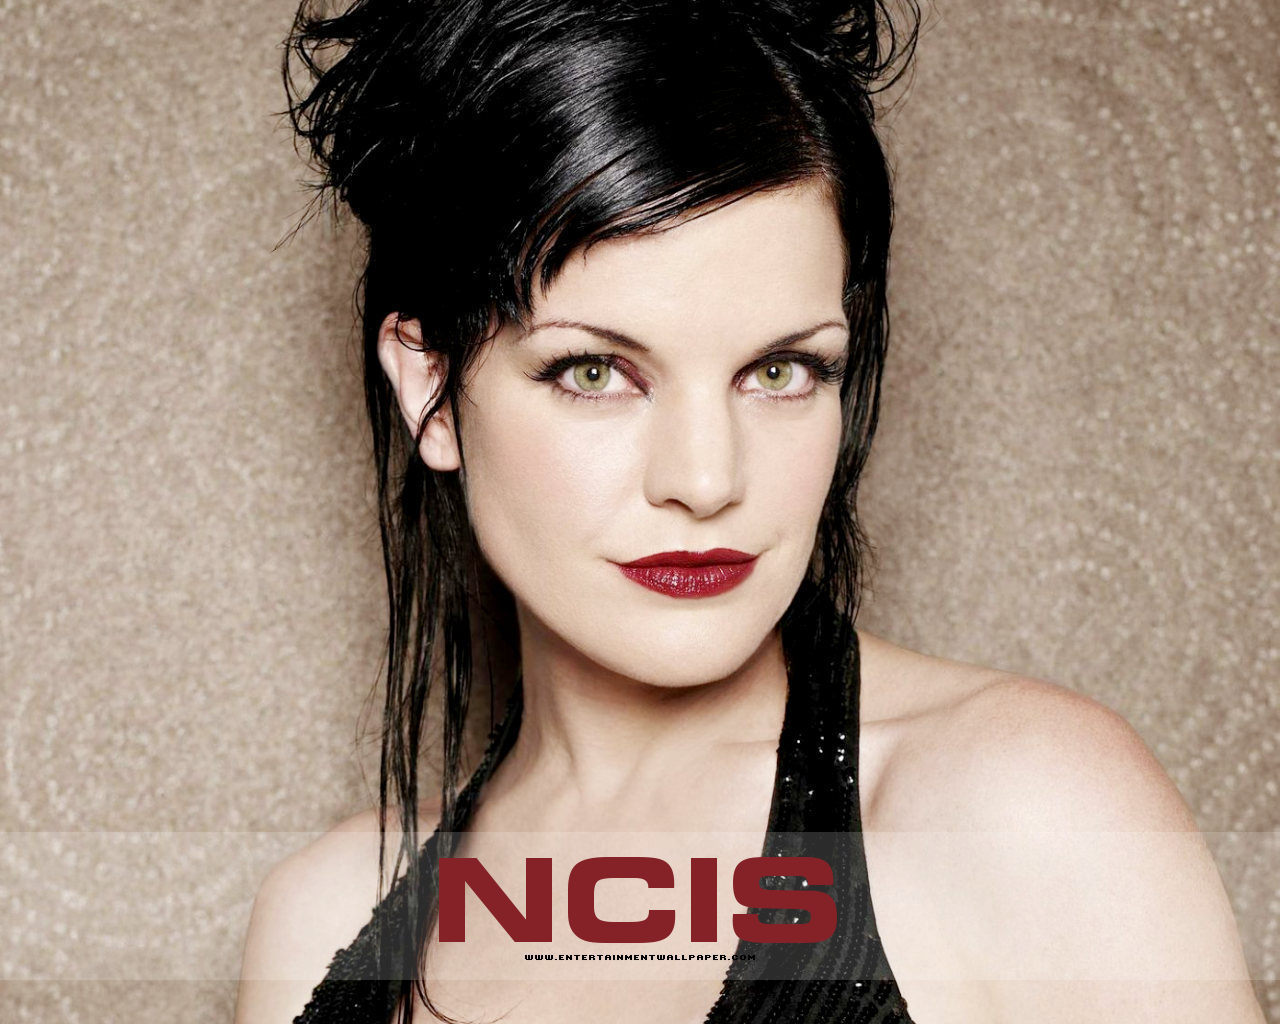 Ncis Image Abby Sciuto HD Wallpaper And Background Photos